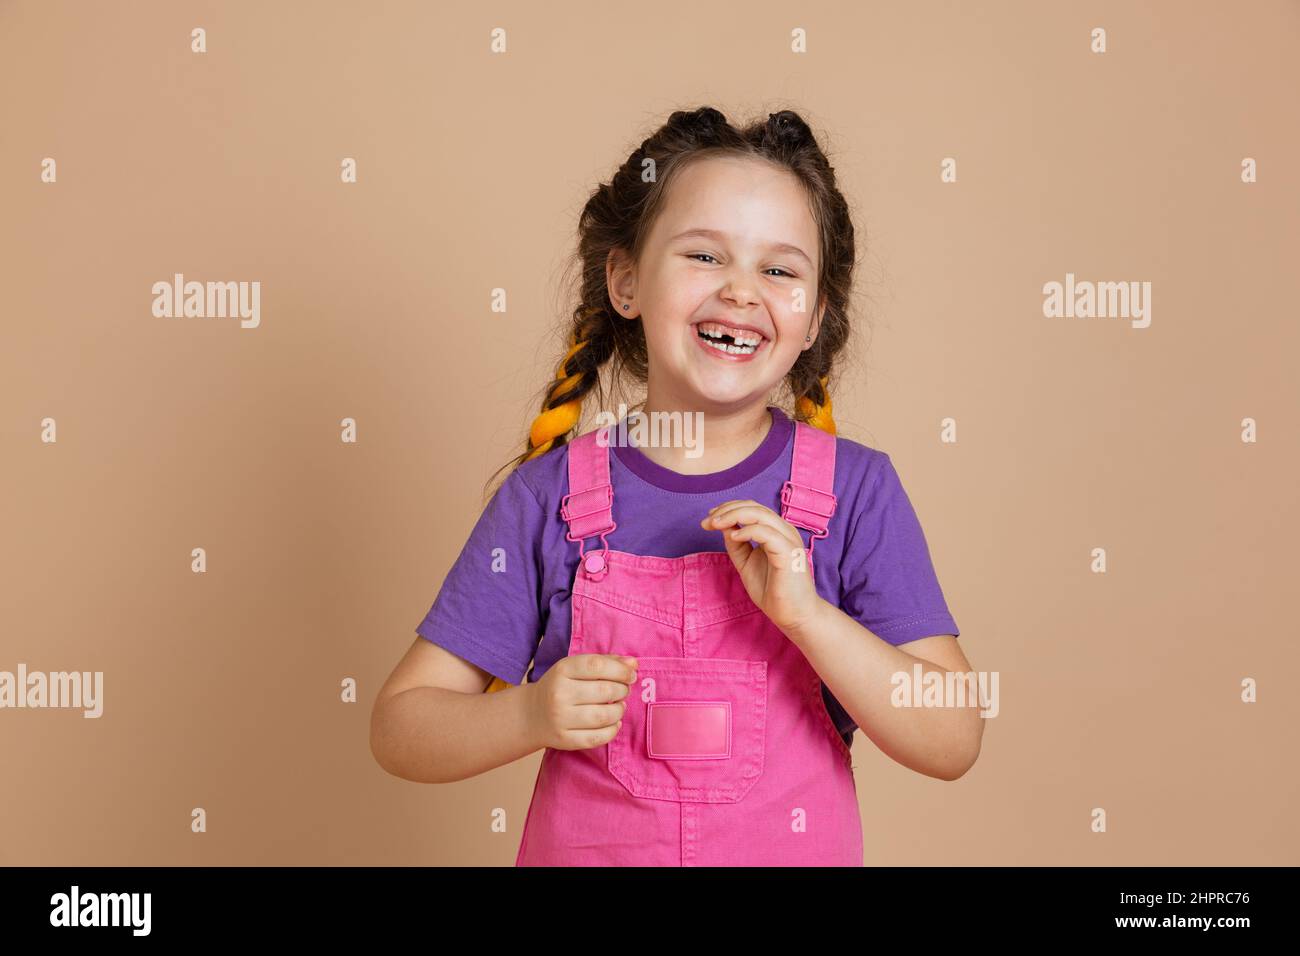 Portrait of laughing small female with kanekalon braids with missing tooth playing, looking at camera wearing pink jumpsuit and purple t-shirt on Stock Photo